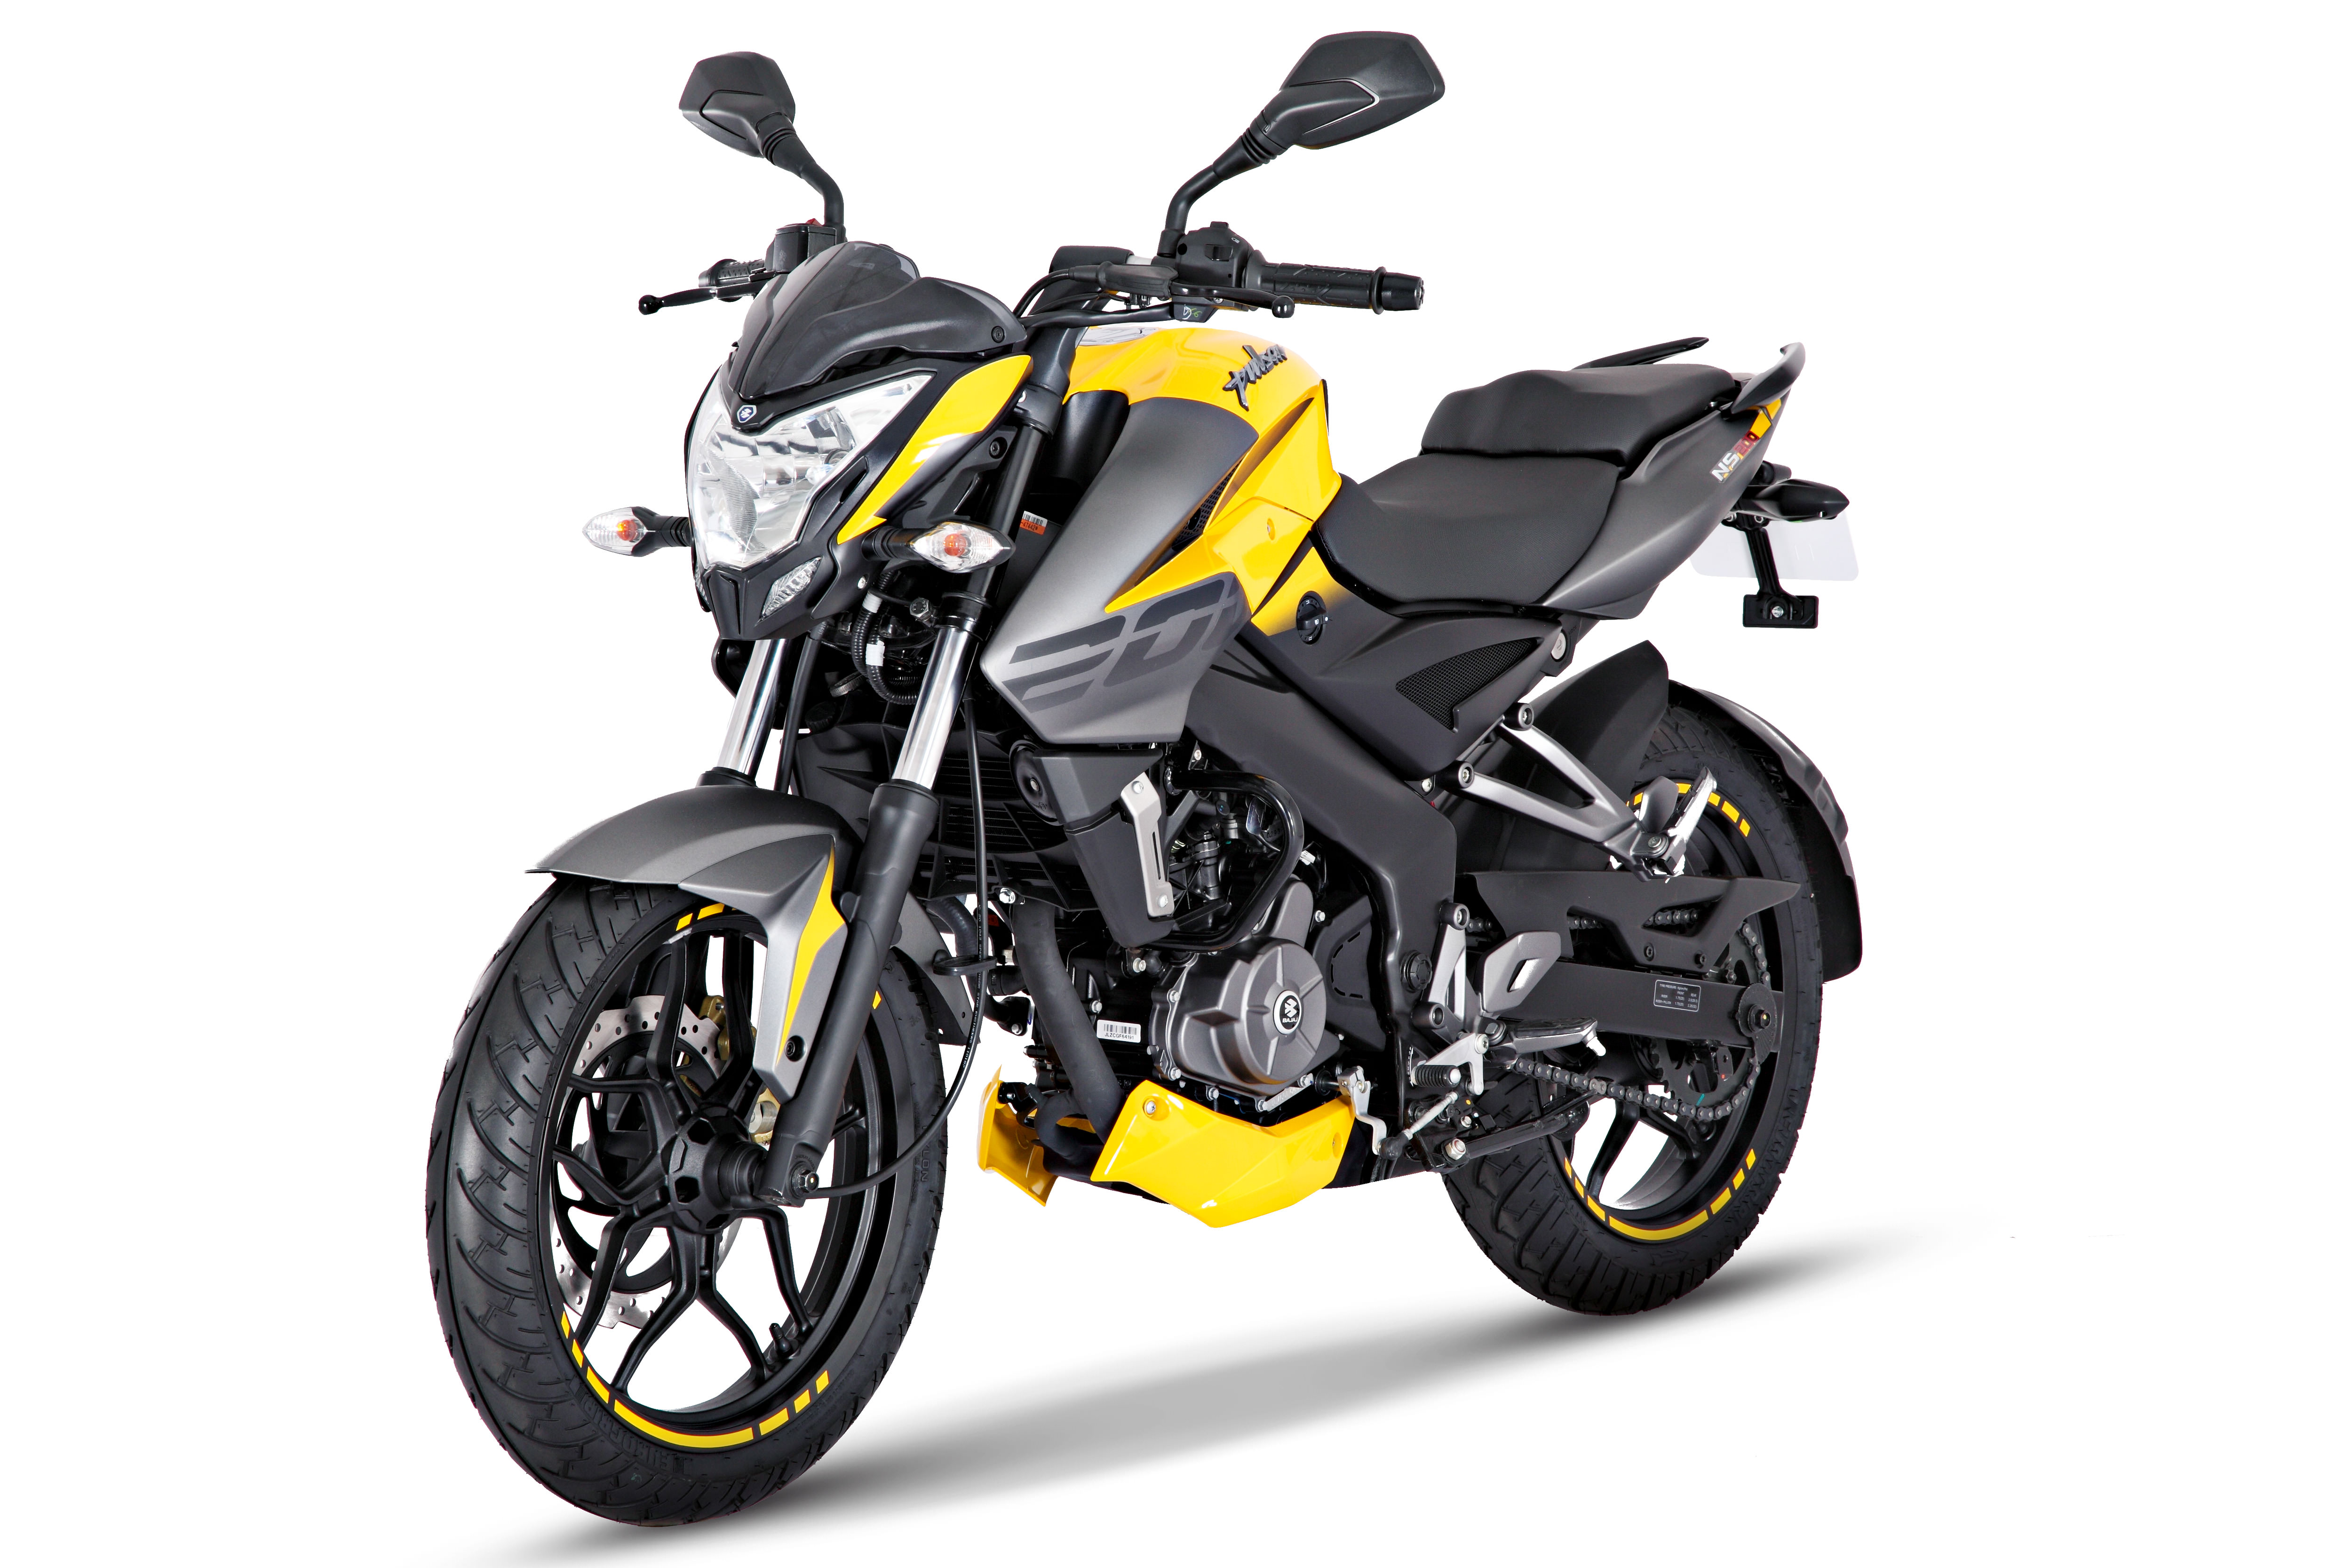 Bajaj Pulsar NS200 ABS variant launched officially in India